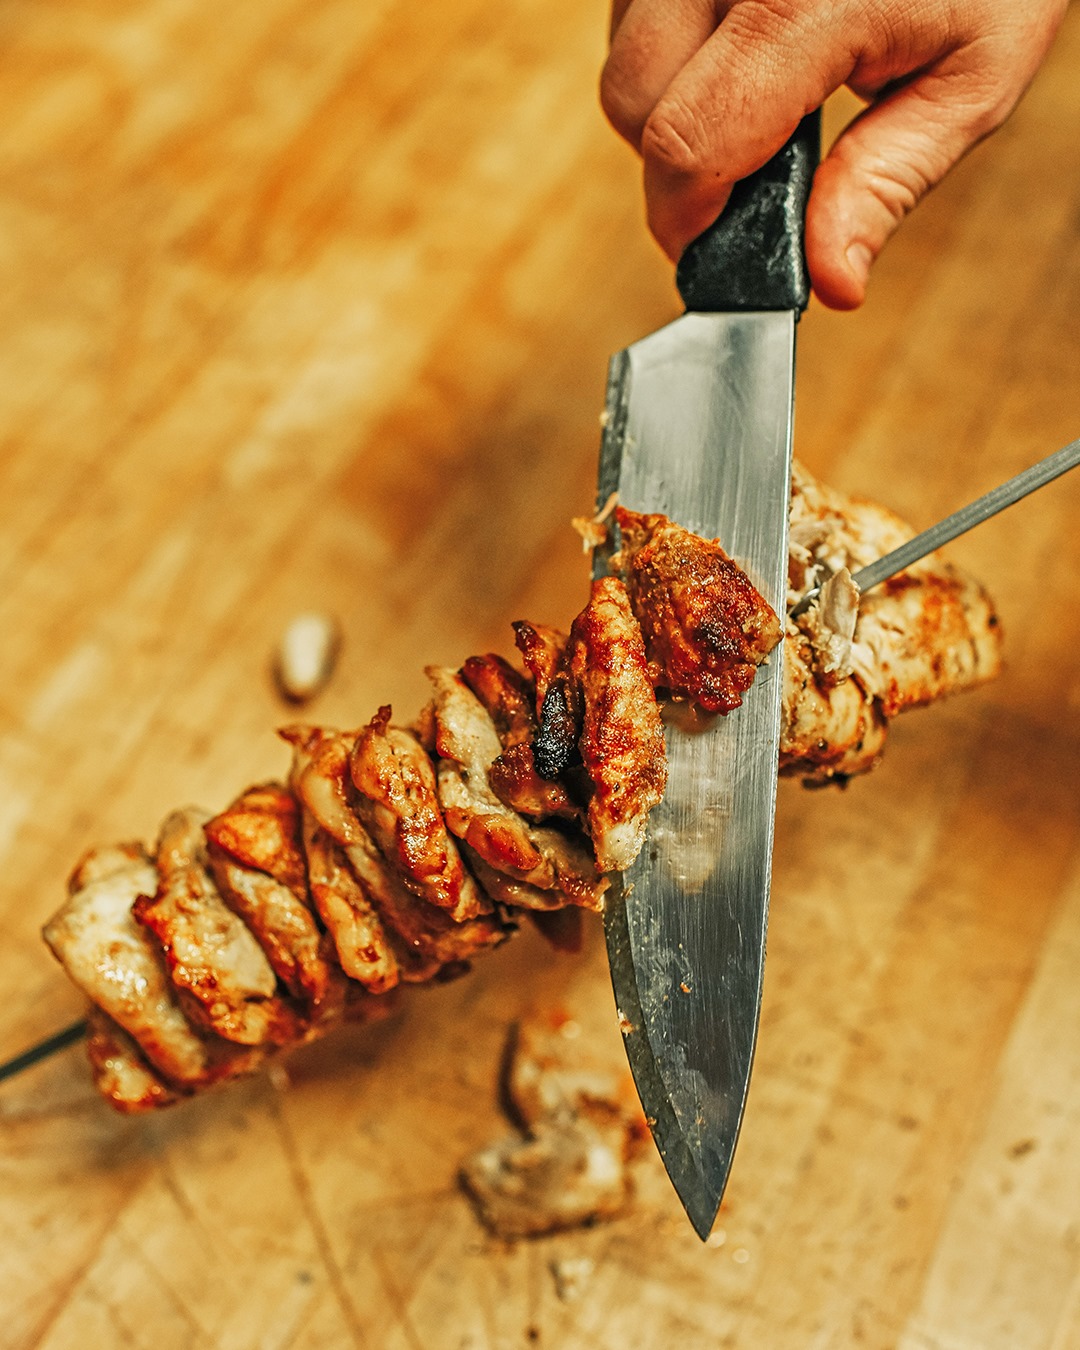 A sharp knife slices pieces of spit-fire roasted chicken from a metal skewer